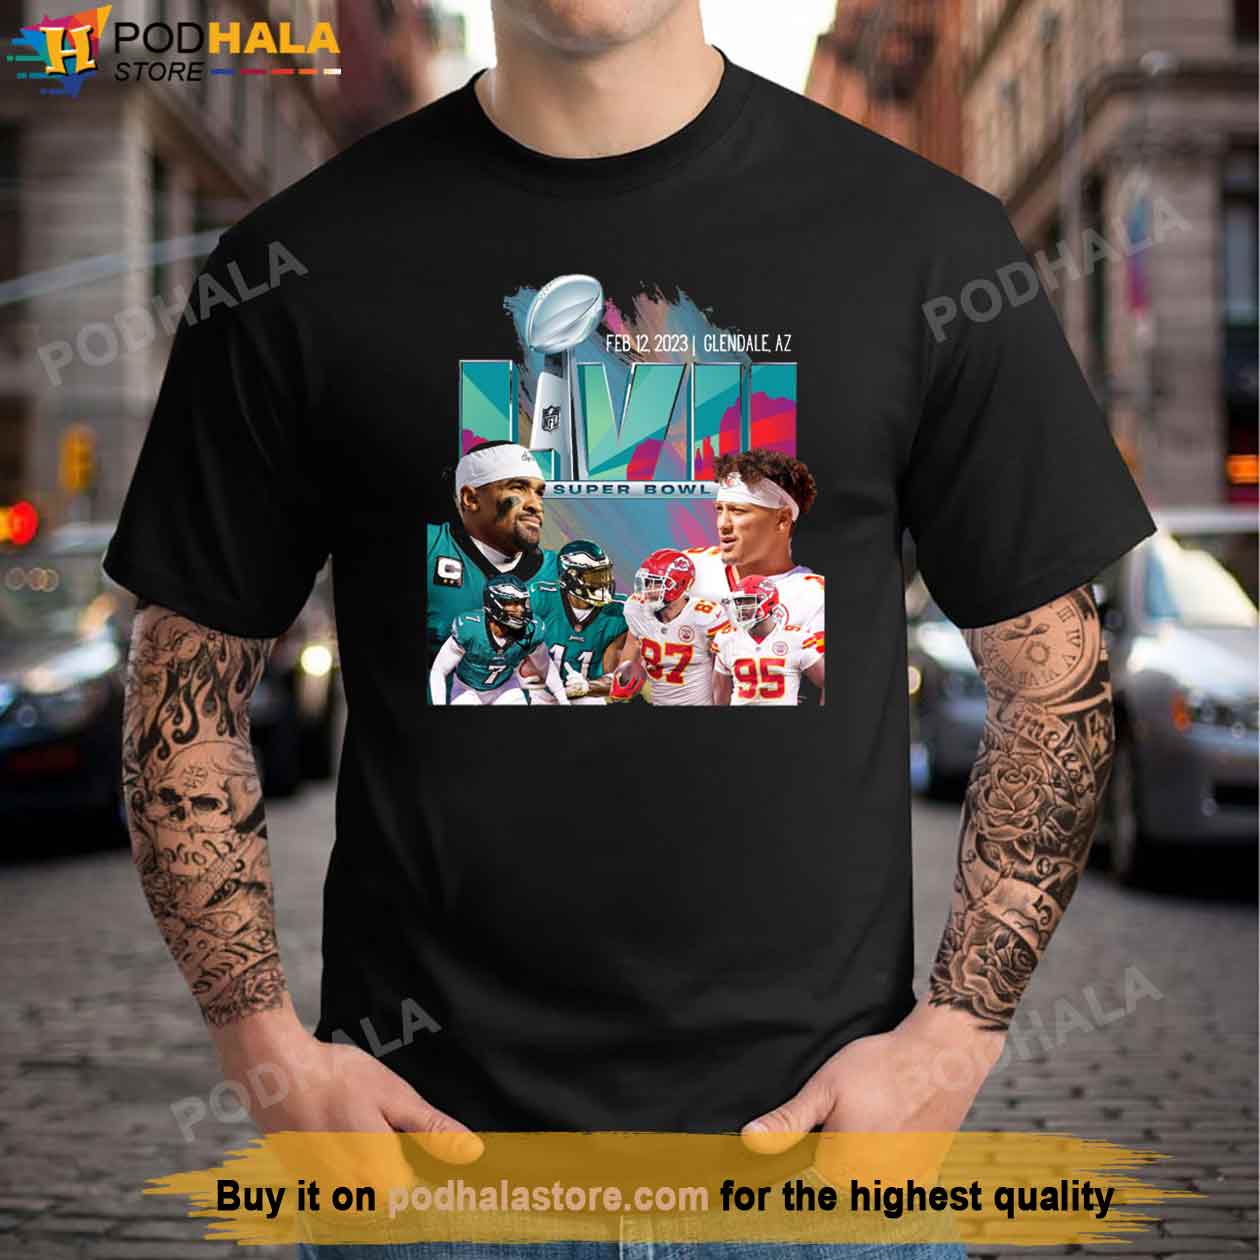 Super Bowl 2023 LVII Shirt, Kansas City Chiefs Vs Philadelphia Eagles T- Shirt - Bring Your Ideas, Thoughts And Imaginations Into Reality Today